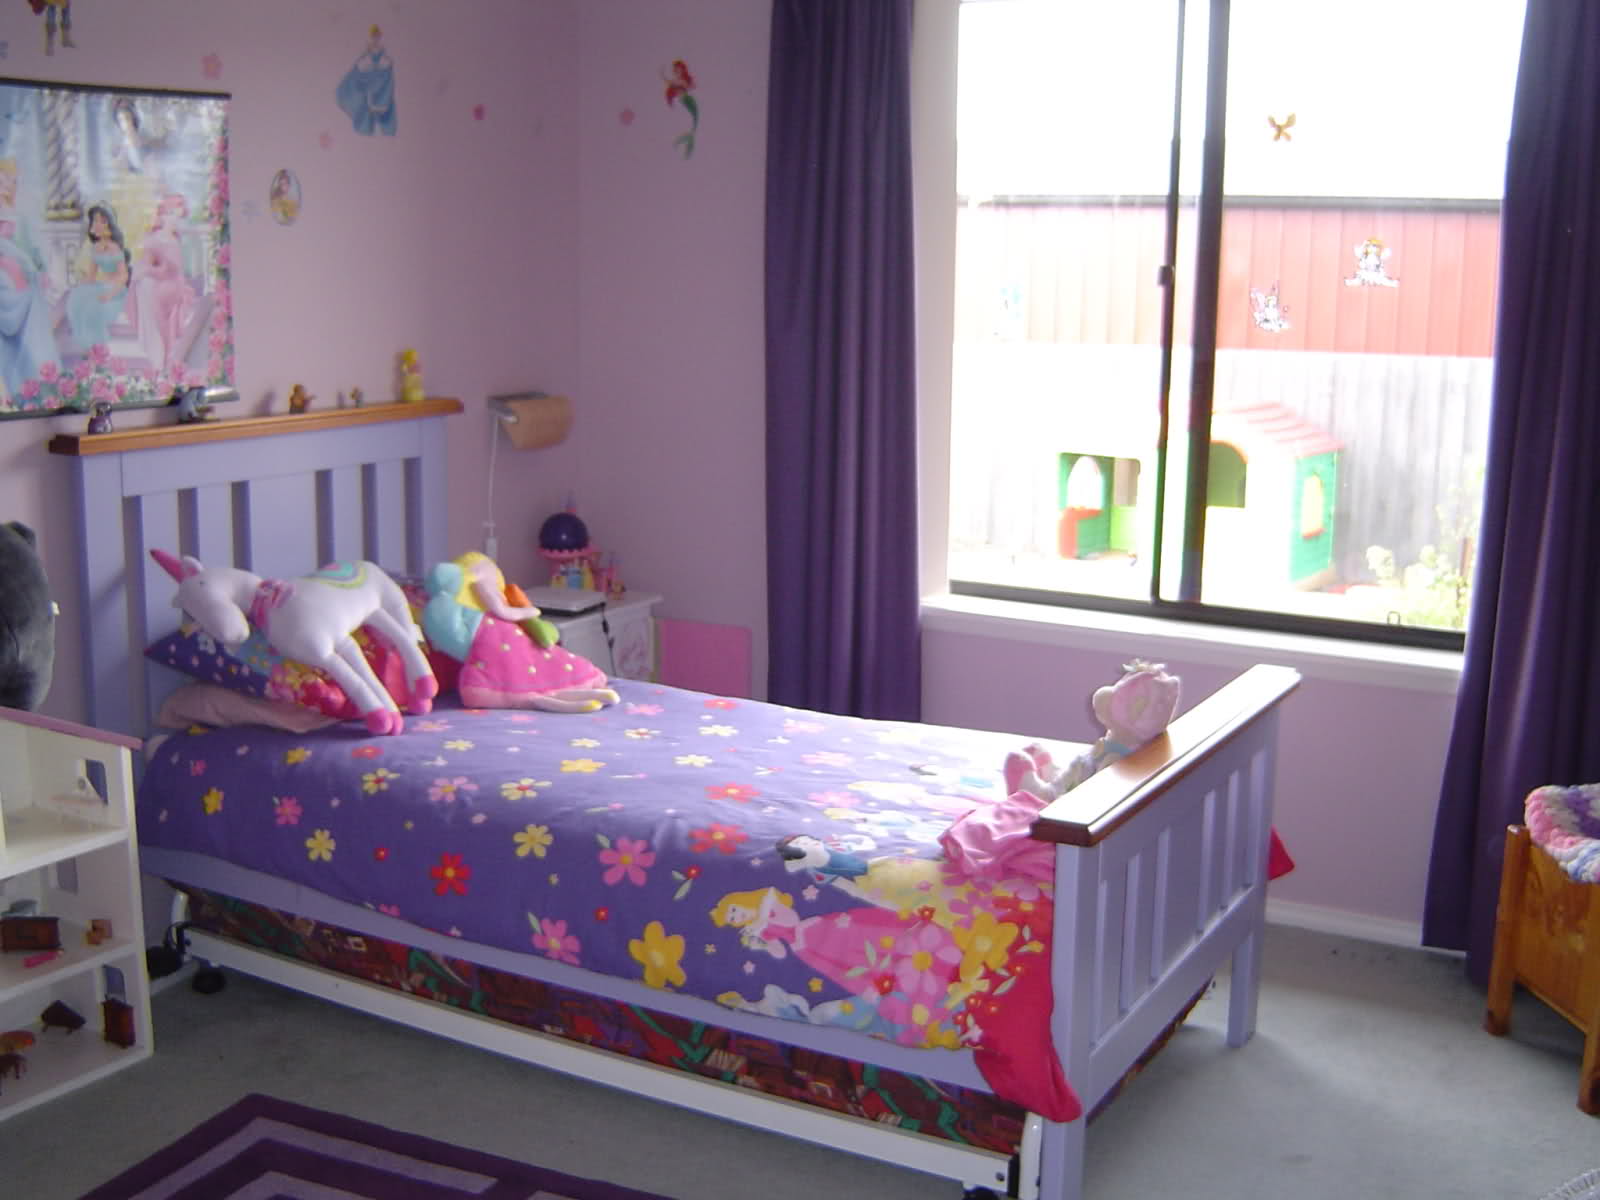 Kids Bedroom Kids Excellent Kids Bedroom With Purple Kids Room Curtains Completed With Single Bed Matched With Hodgepodge Pillows And Furnished With White Nightstand Decoration The Better Appearance Through The Kids Room Curtains